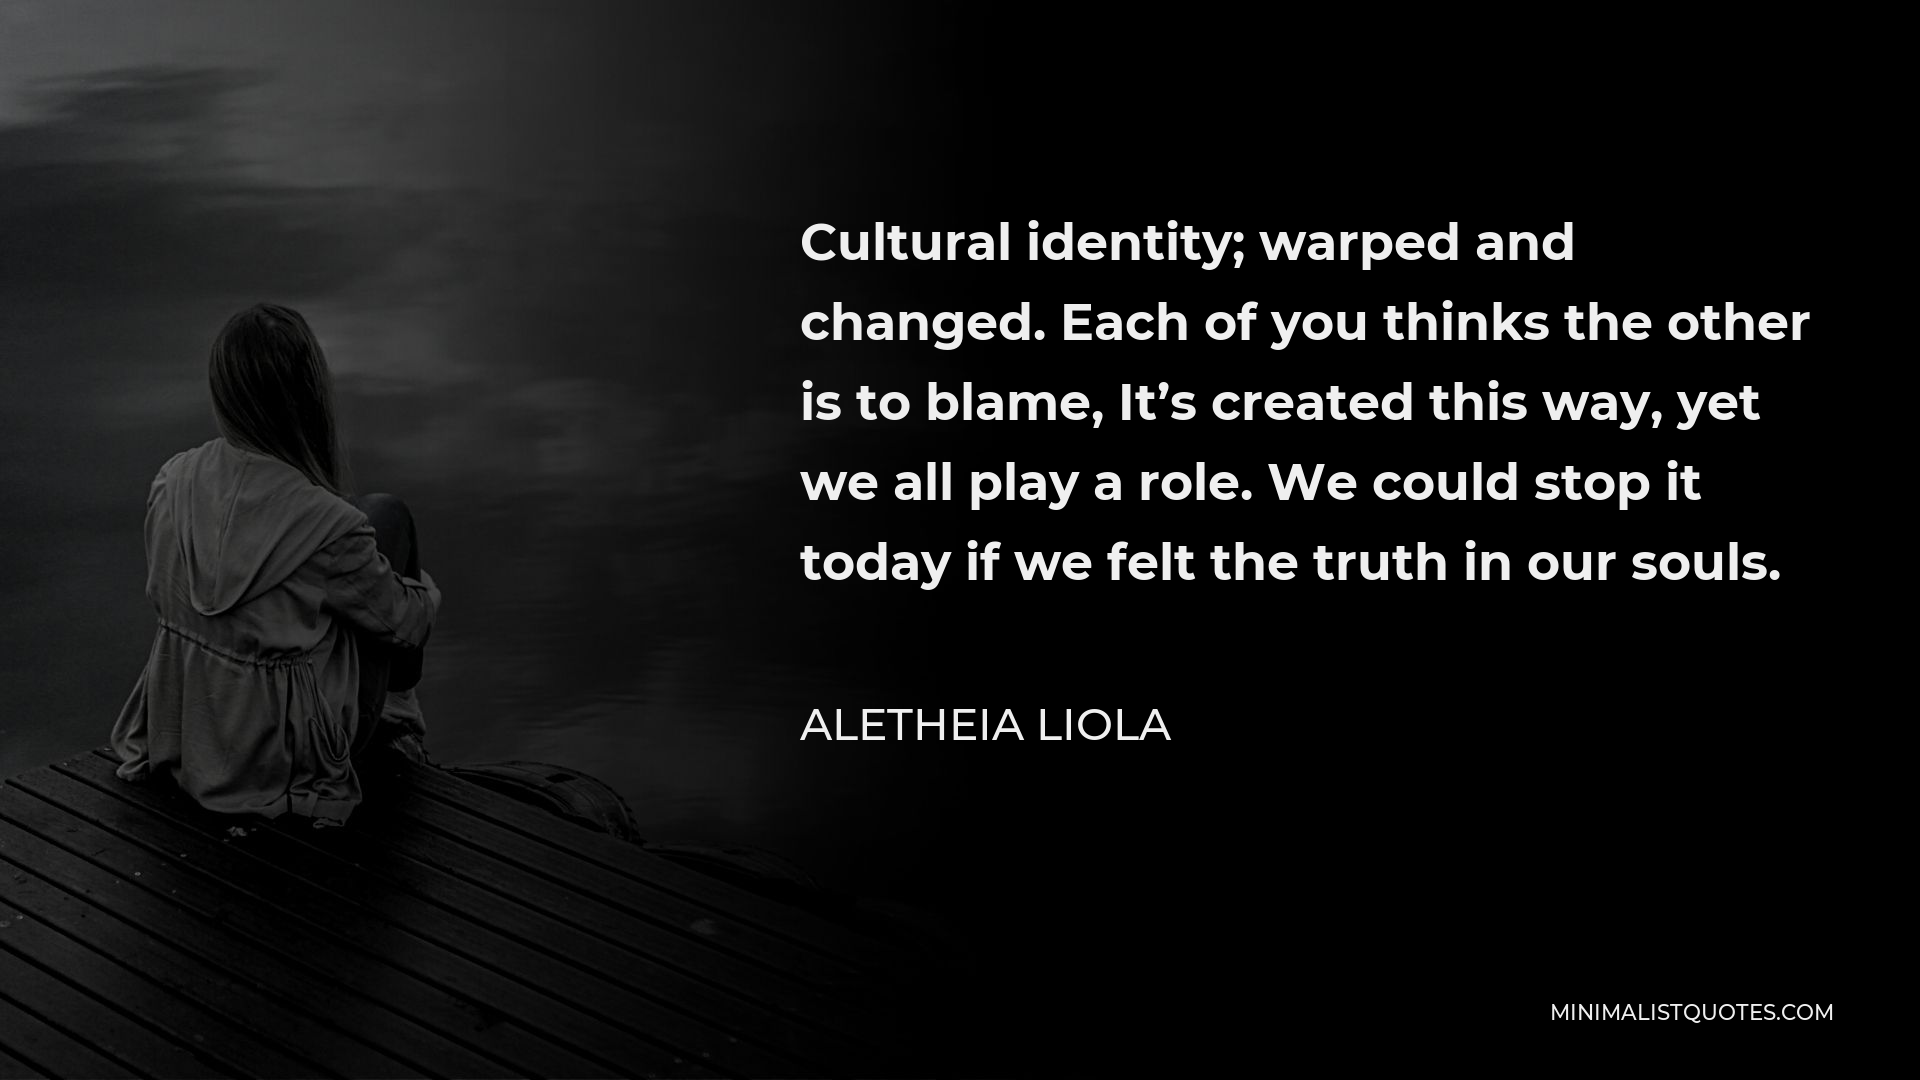 Aletheia Liola Quote - Cultural identity; warped and changed. Each of you thinks the other is to blame, It’s created this way, yet we all play a role. We could stop it today if we felt the truth in our souls.